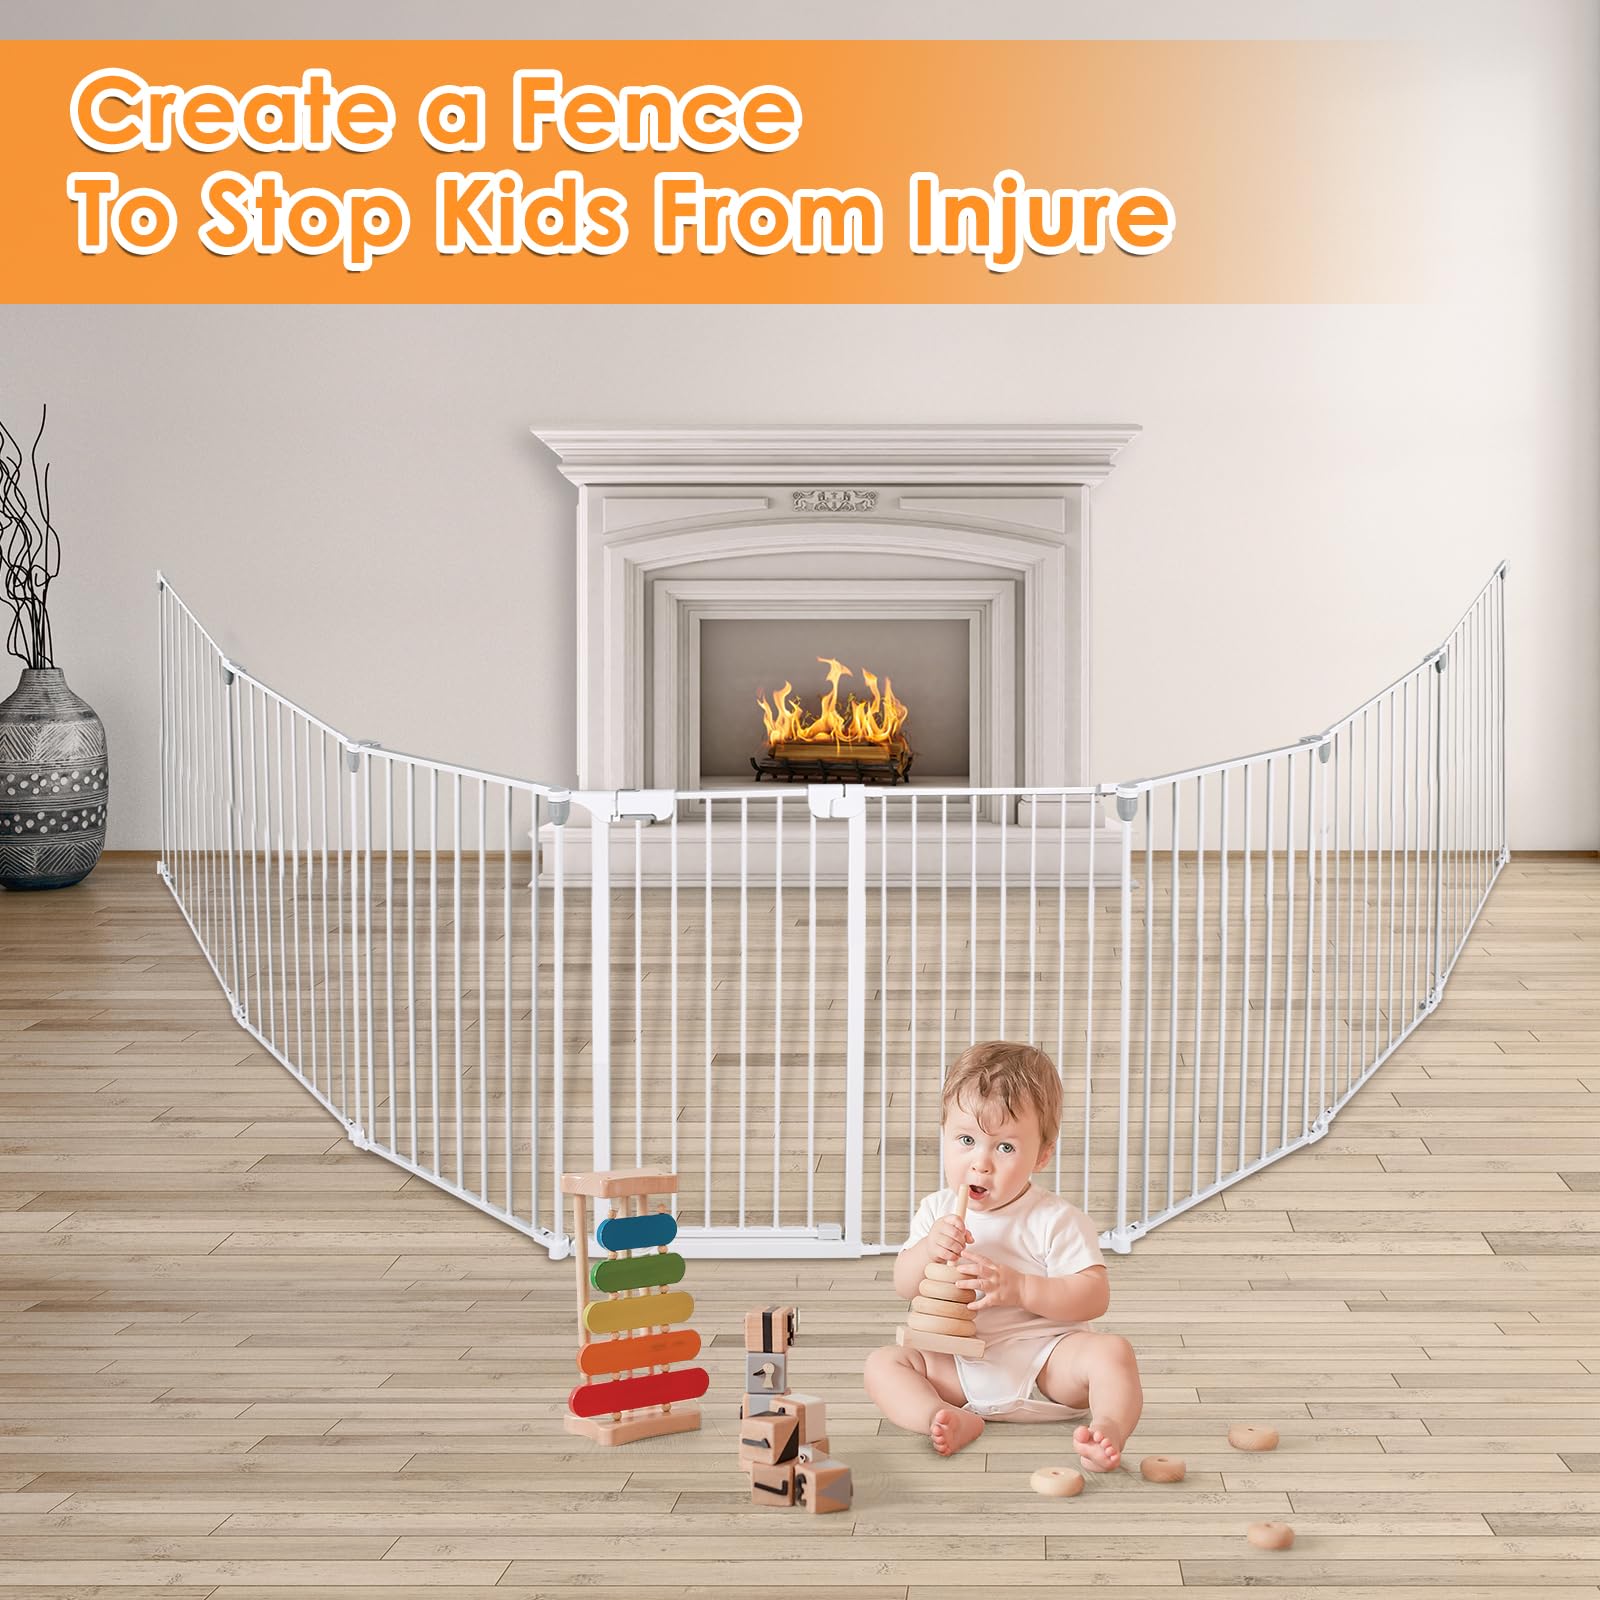 Patywaga Baby Gate Extra Wide with 8 Metal Pannels,Extra Long Dog Gate Pet Gate or Used to Stairs Doorways Fireplace Fence,3-in-1 Baby Gate Playpen,Child Safety Gate and Safety Barrier